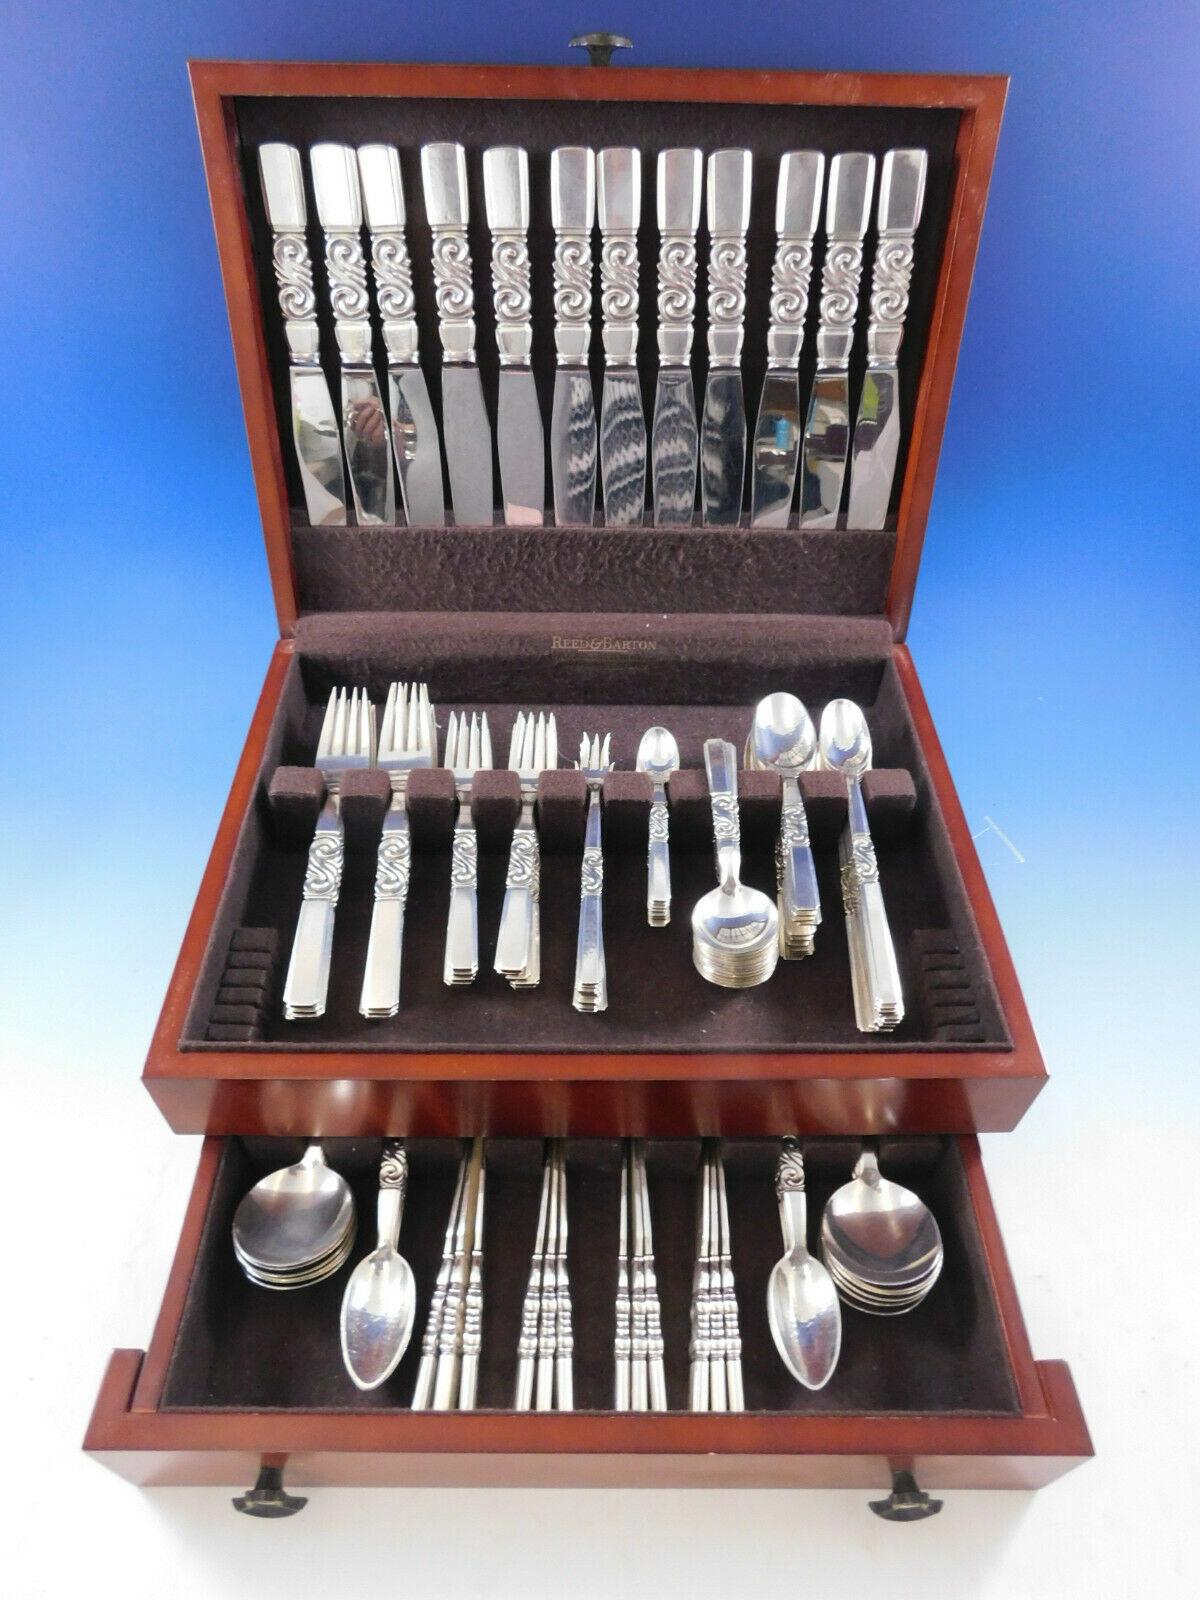 Outstanding scroll by Georg Jensen Danish sterling silver flatware set with extra large European size knives and Forks - 132 Pieces. This set includes:

12 large European size knives, 9 3/4